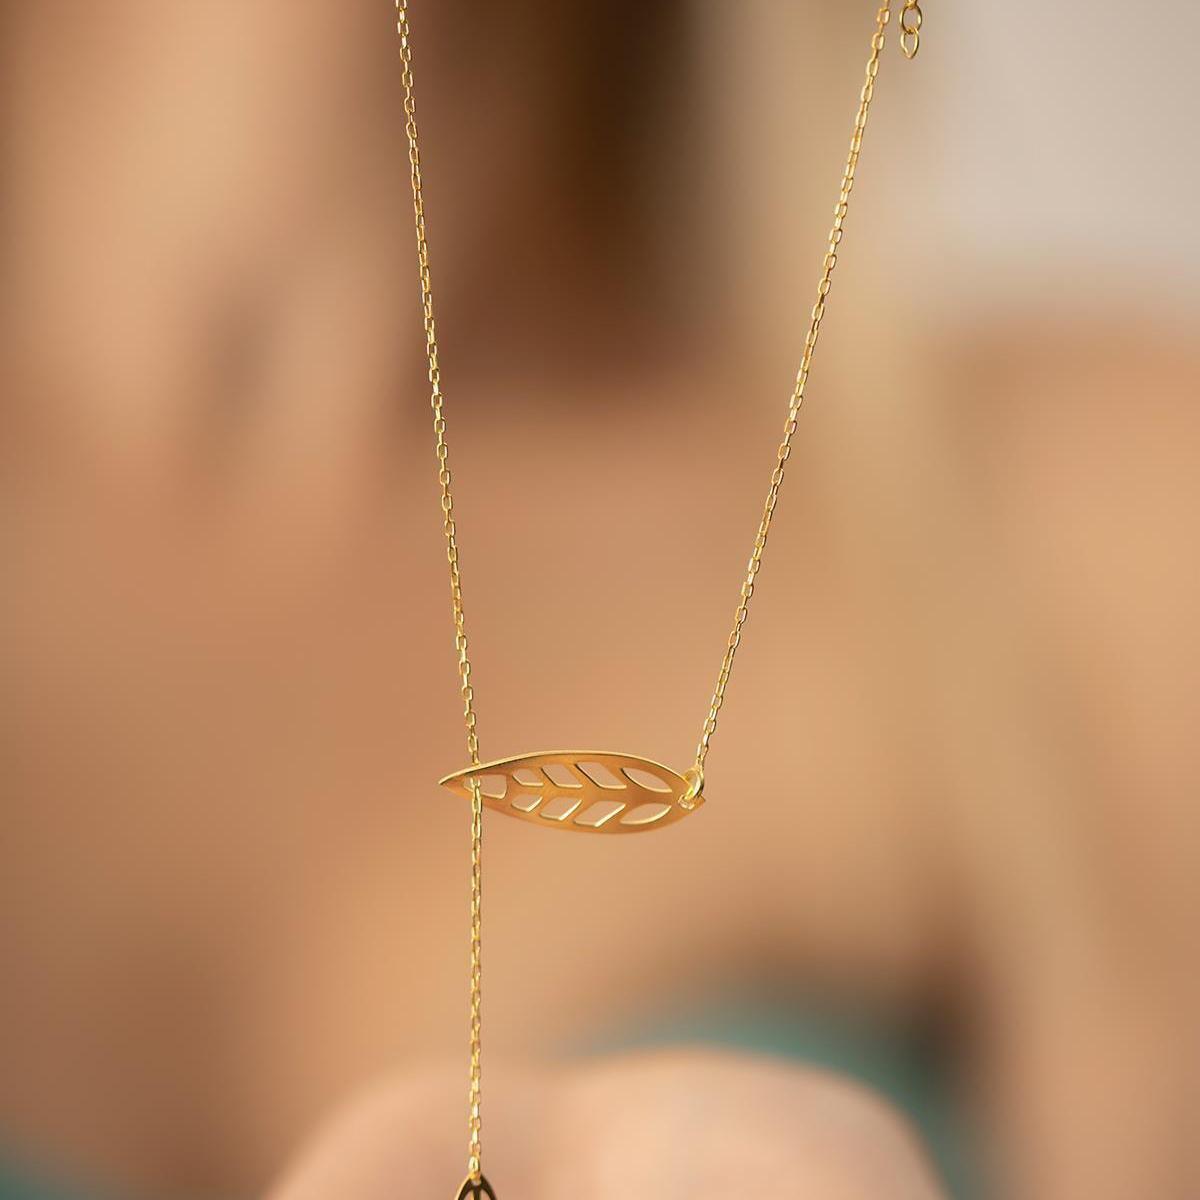 Leaf Pendant Necklace • Leaf Pendant Necklace Gold • Gift For Her - Trending Silver Gifts